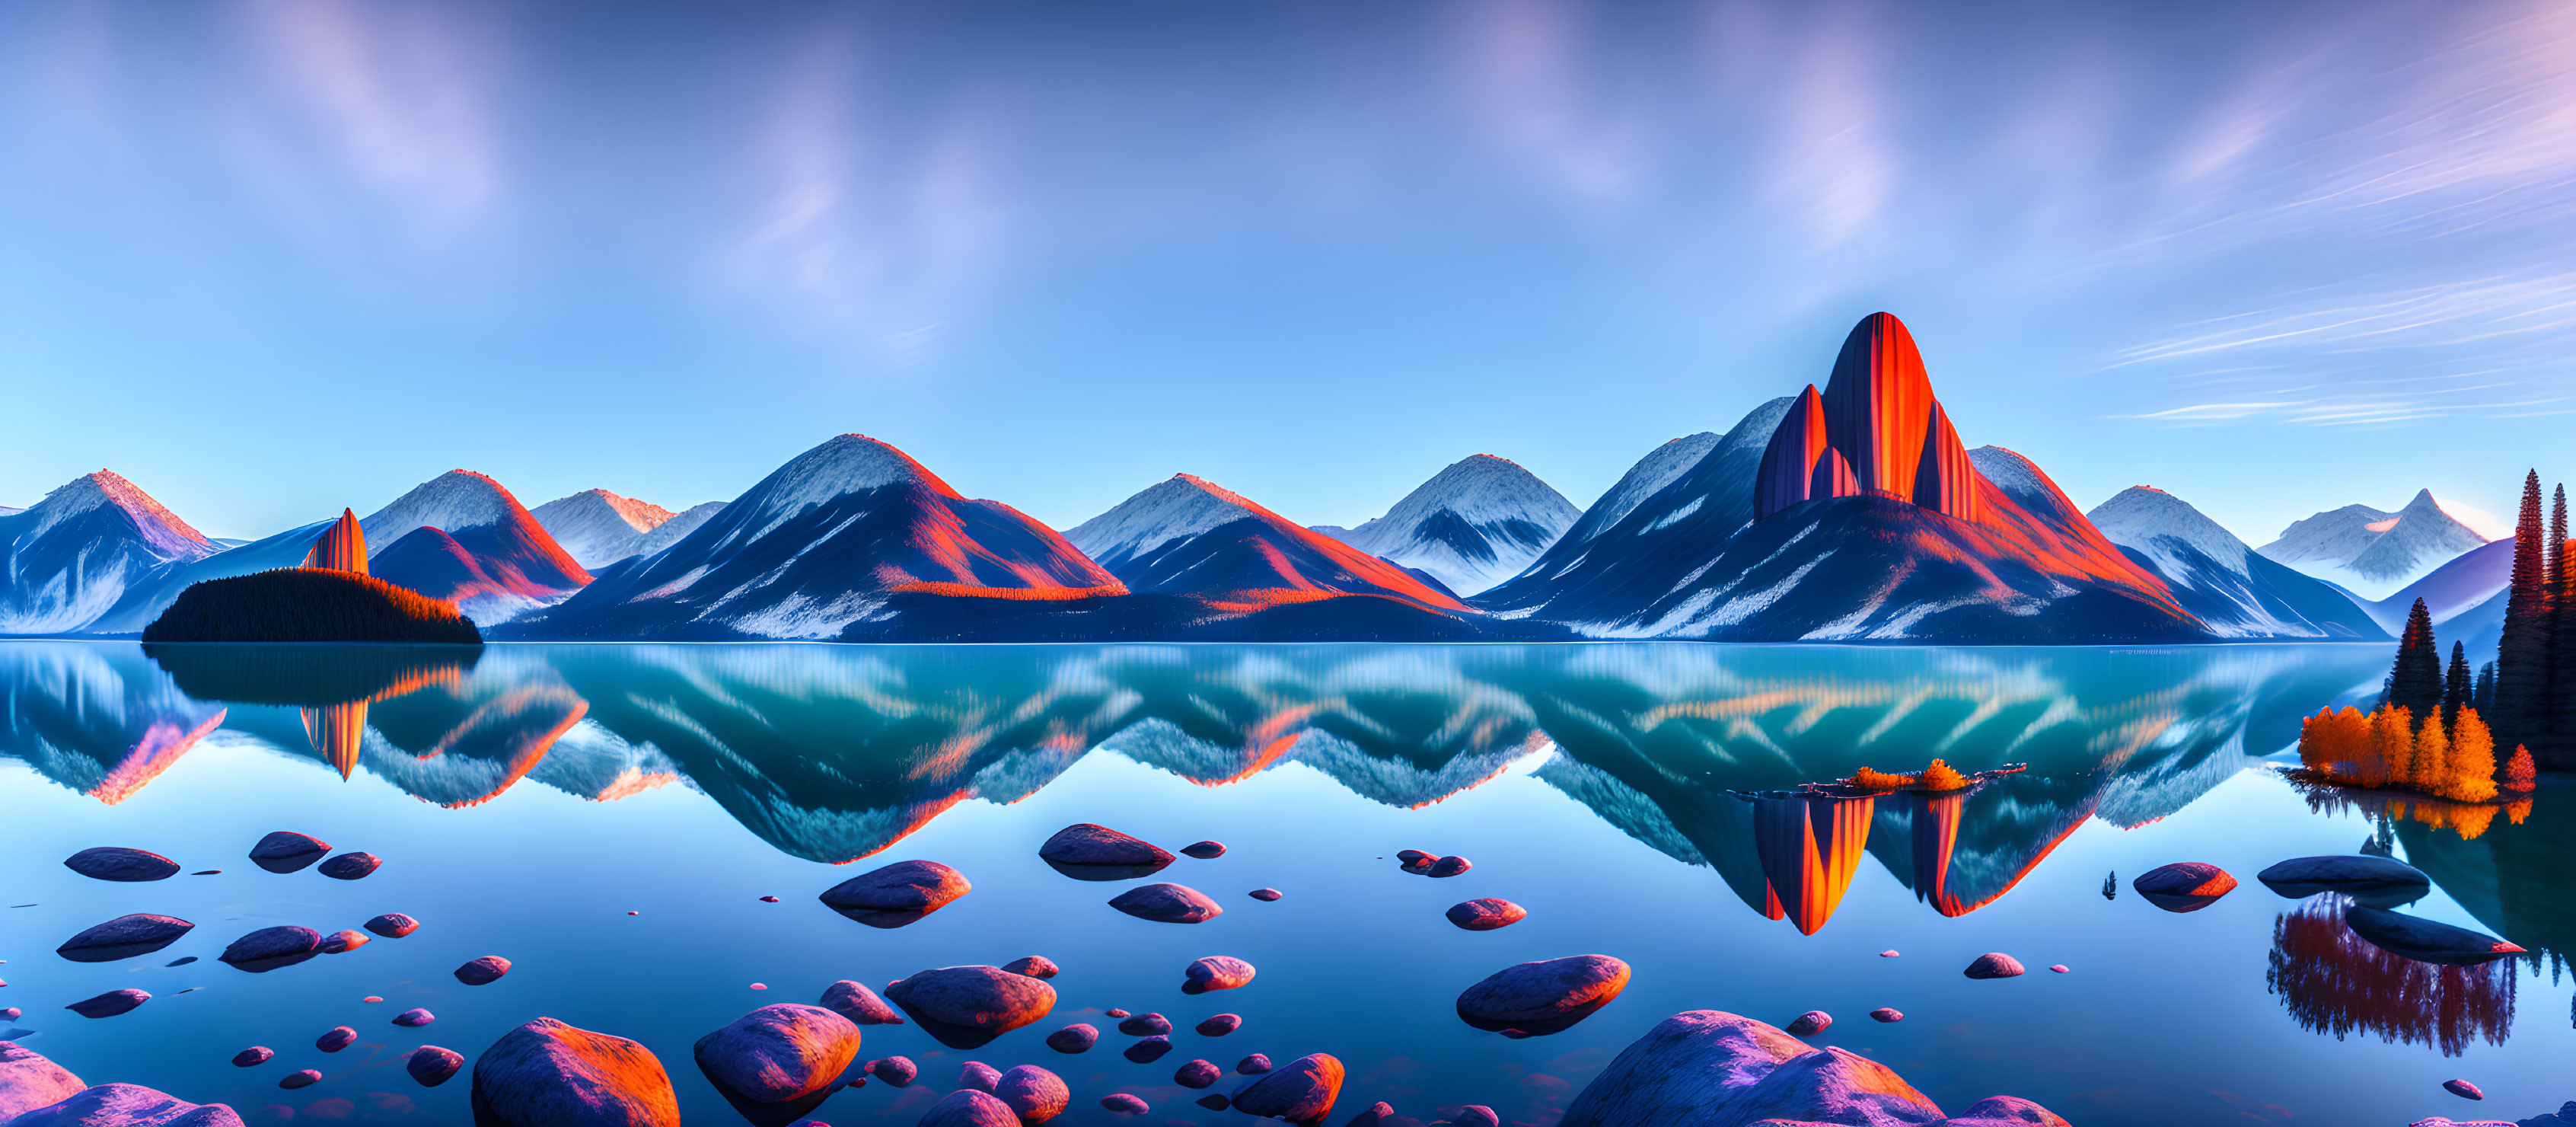 Mountain Reflections at Dusk